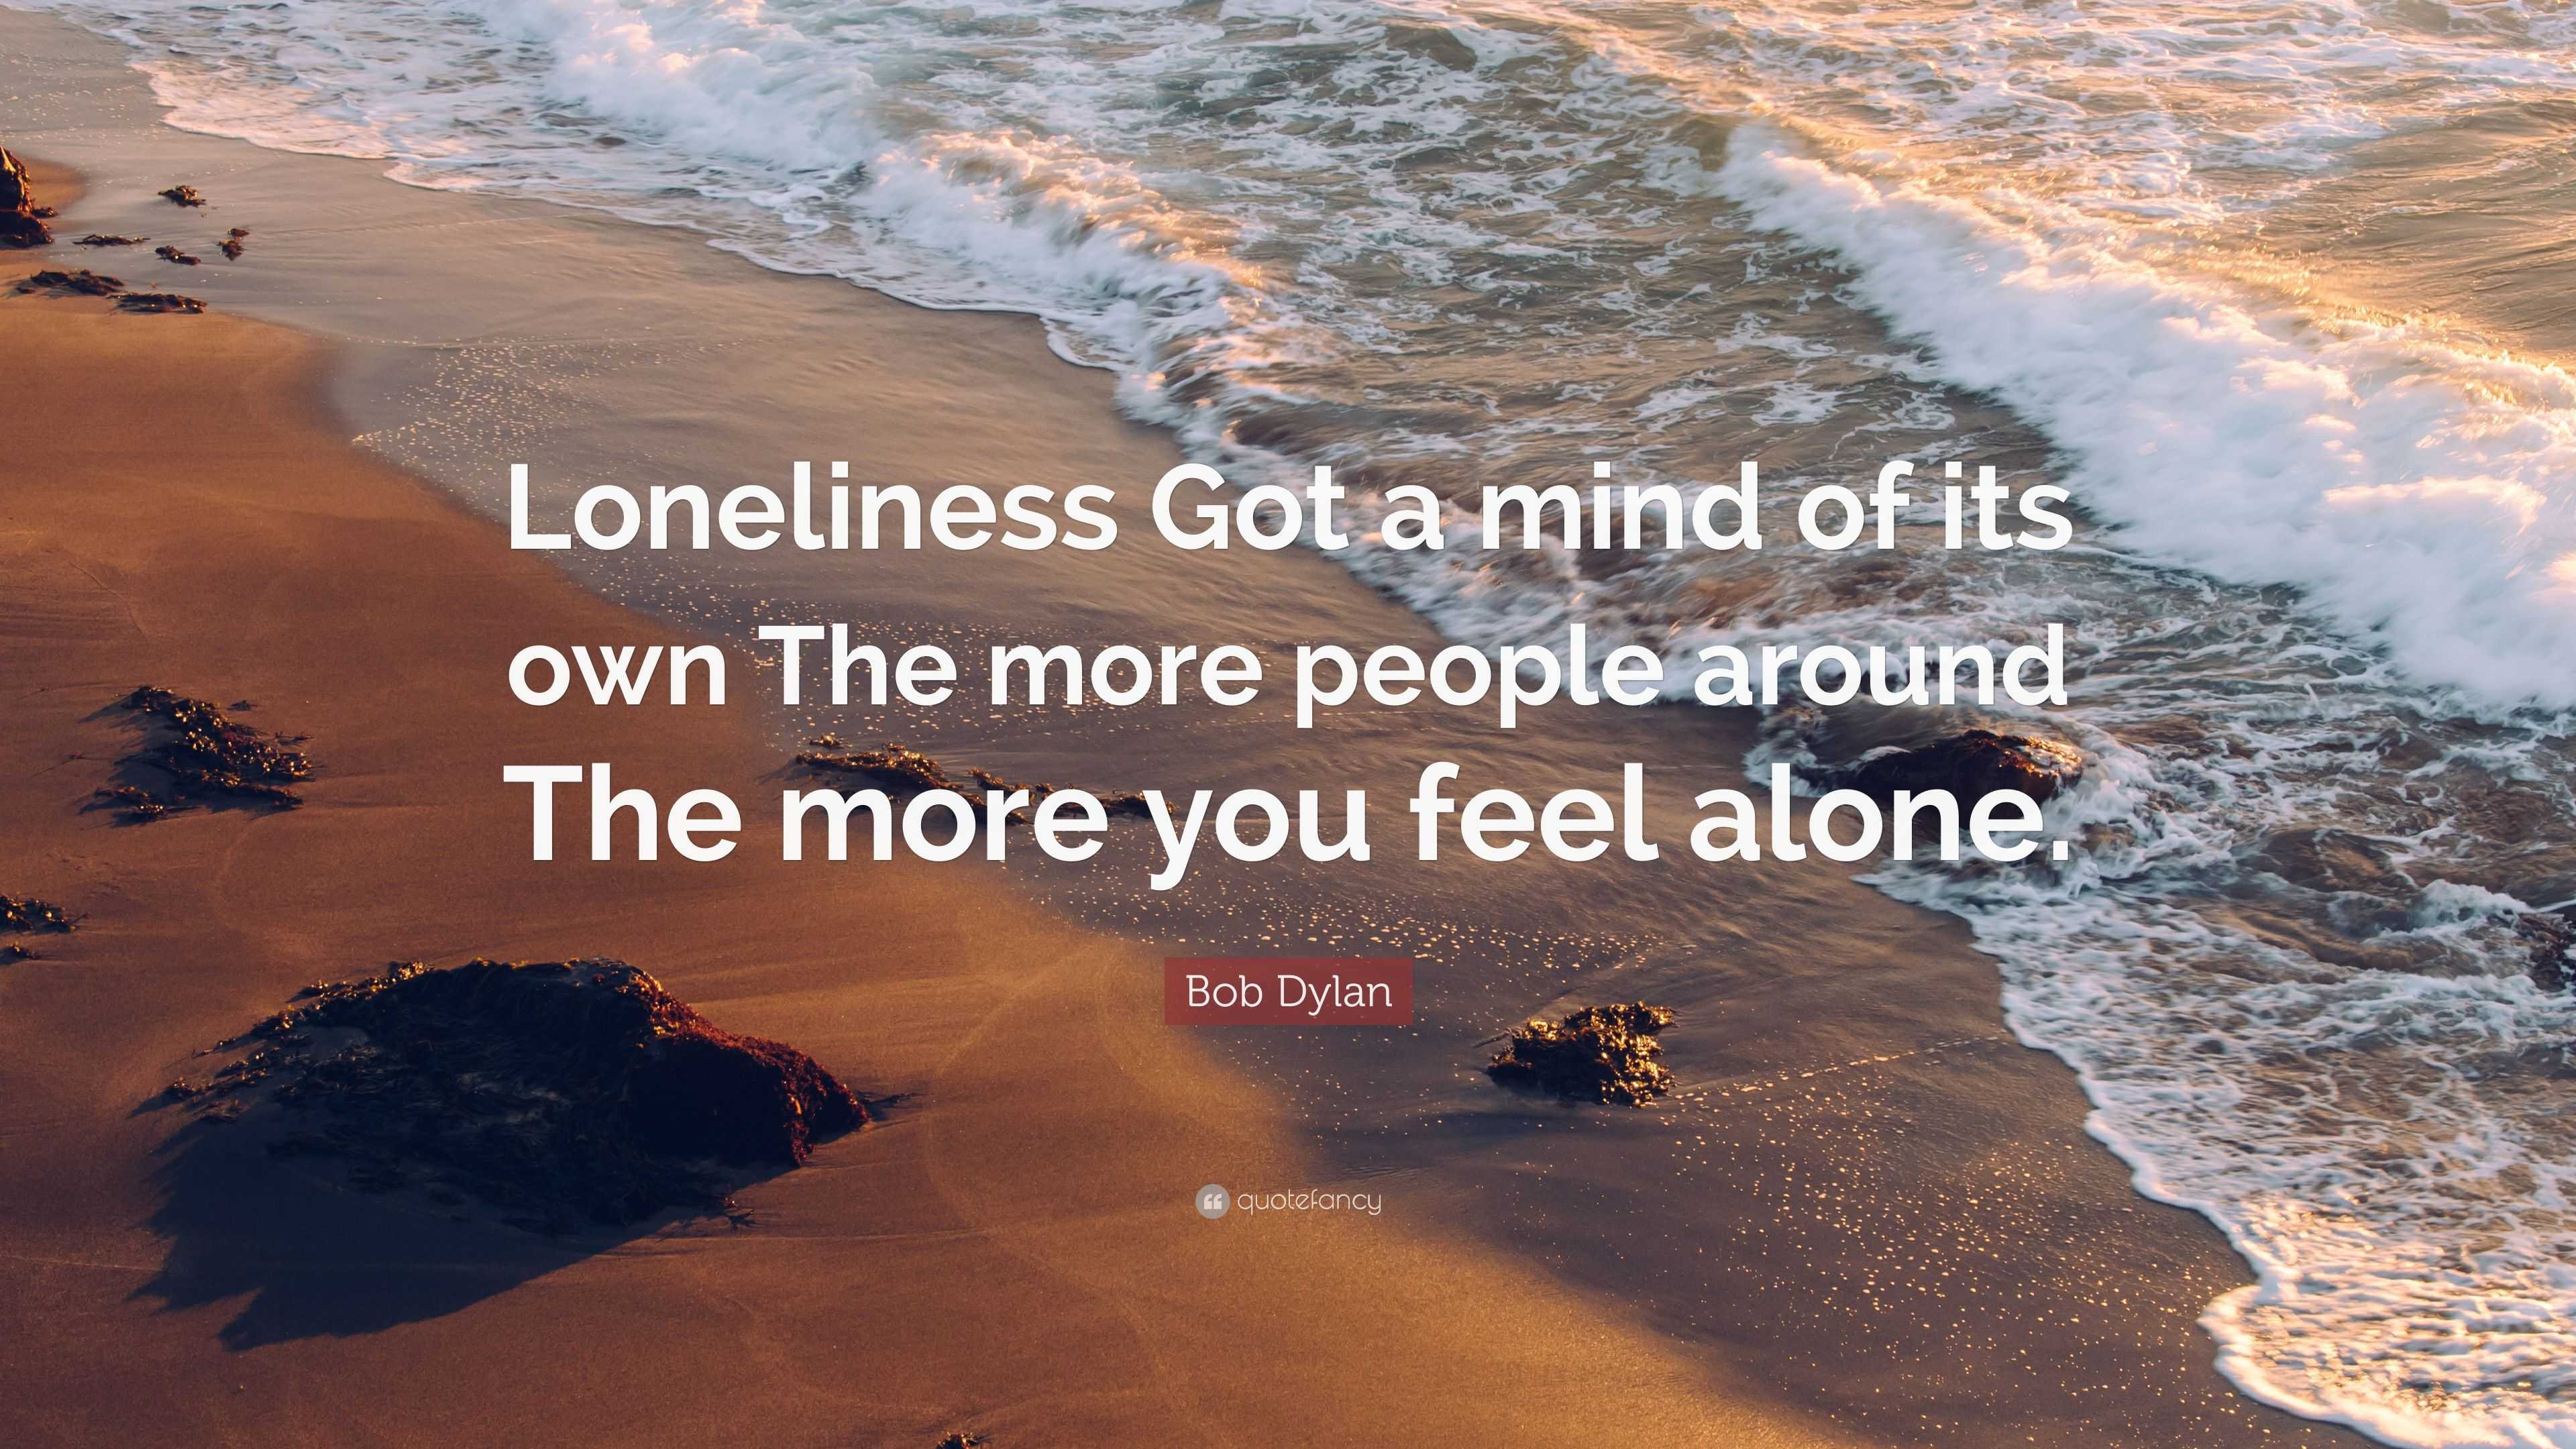 Bob Dylan Quote: “Loneliness Got a mind of its own The more people ...